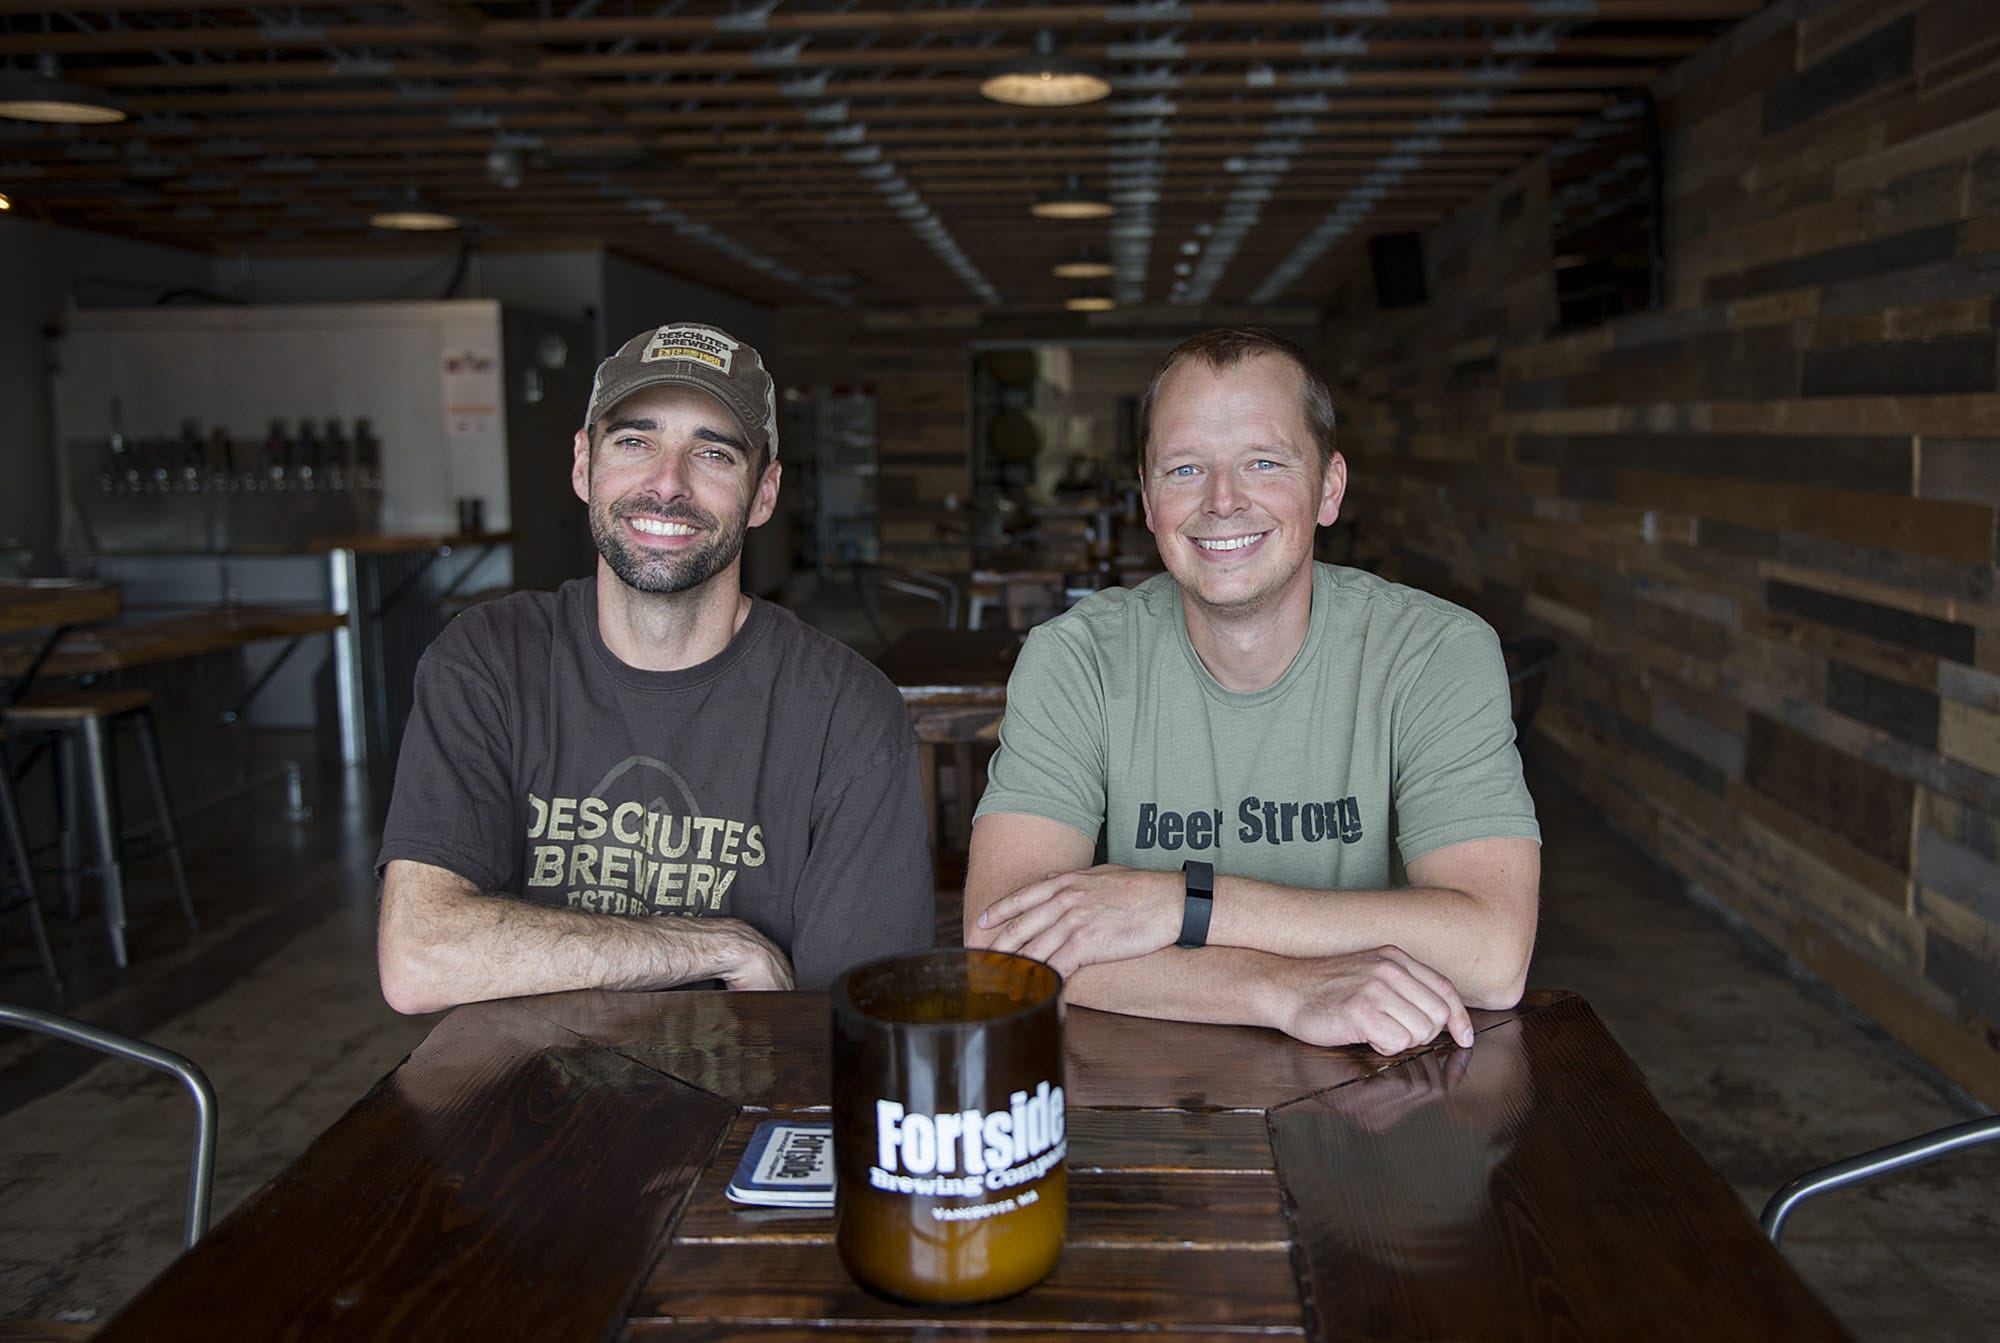 Fortside Brewing Company co-owners Mark Doleski, left, and Mike DiFabio chat in their Vancouver tasting room. The two men, former classmates at Prairie High School, are preparing for Fortside’s grand opening celebration that begins Thursday.